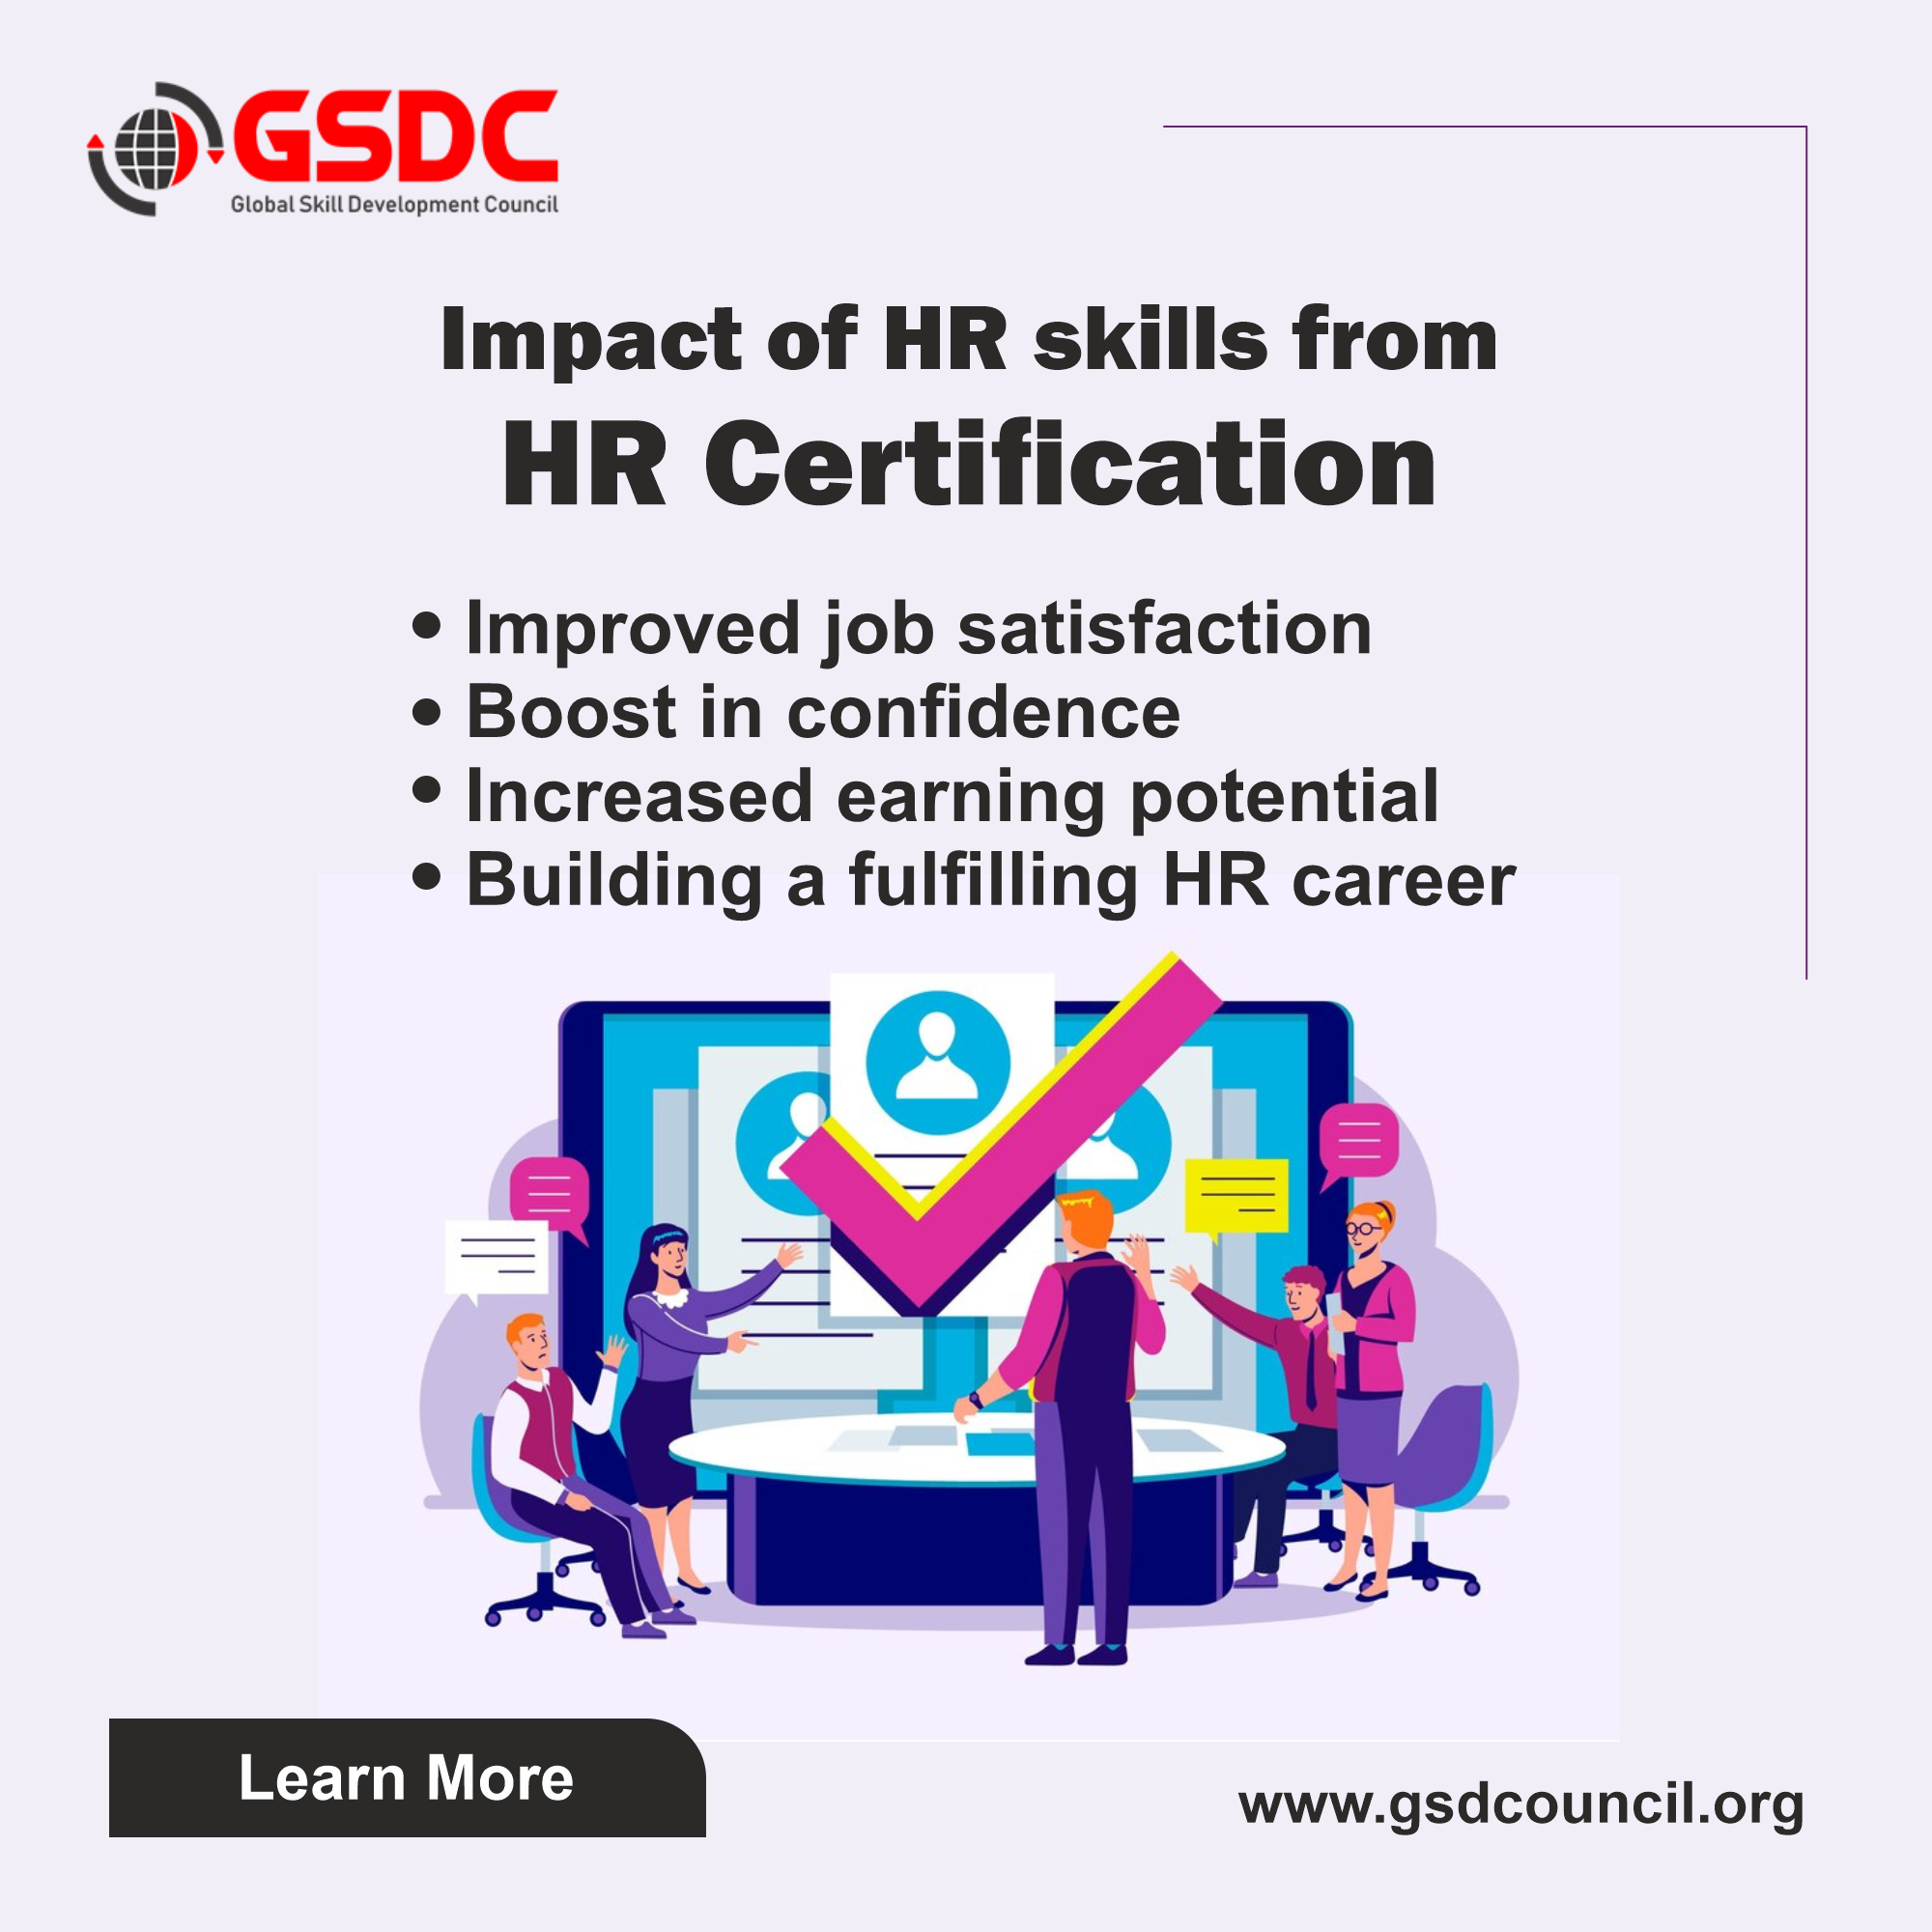 Impact of HR skills from HR Certification